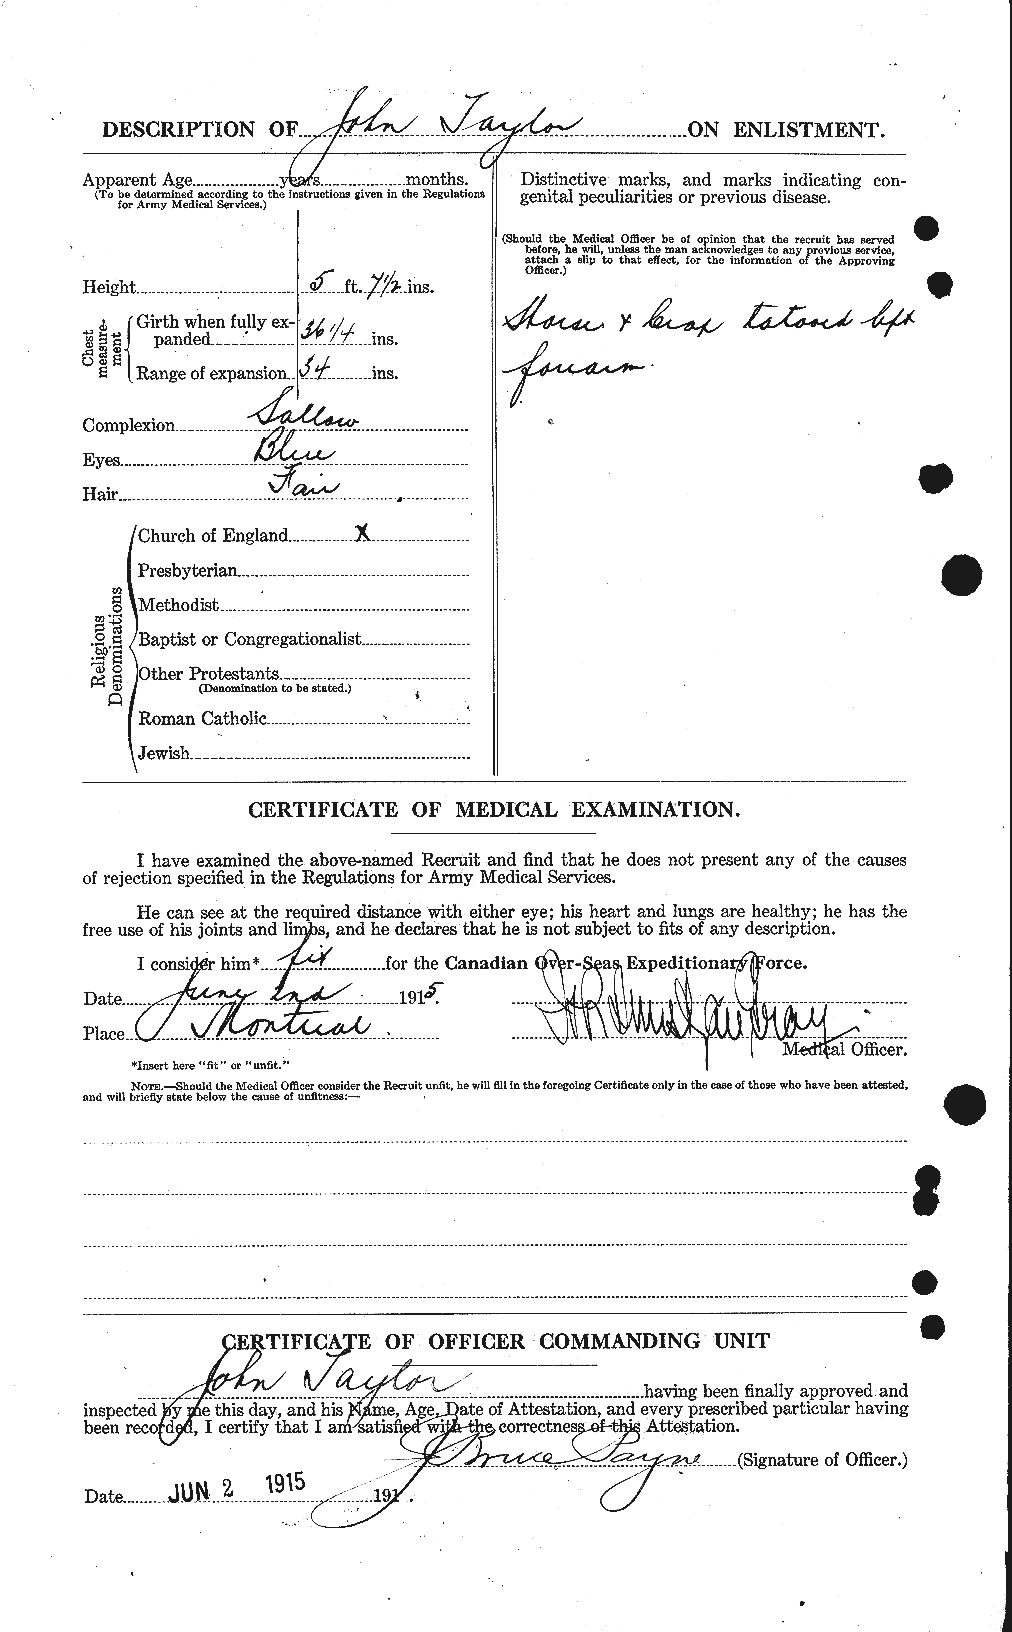 Personnel Records of the First World War - CEF 627023b